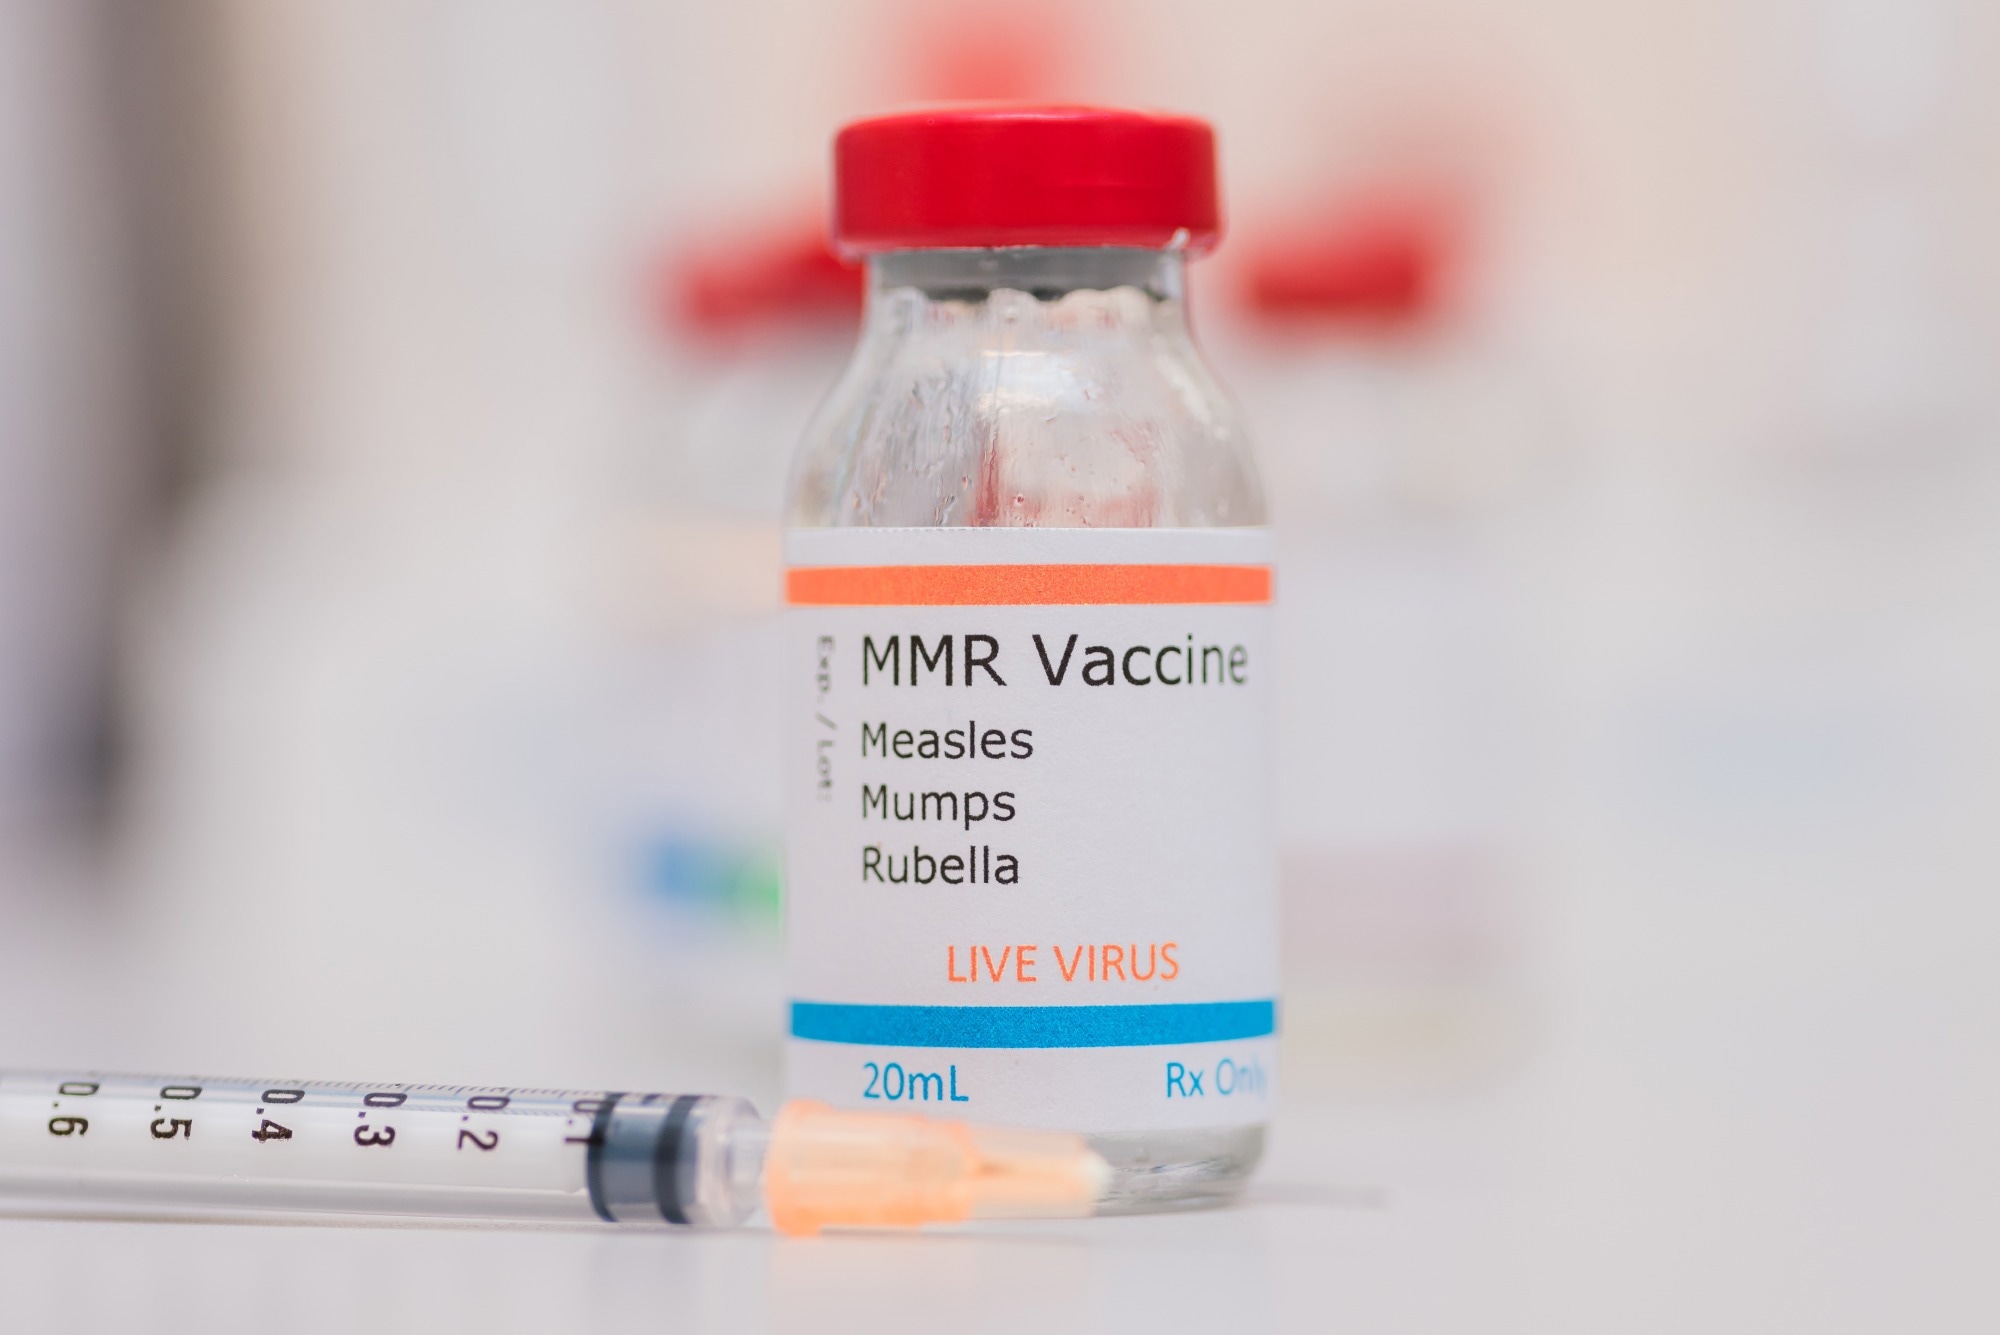 Study: Is vaccination against measles, mumps, and rubella associated with reduced rates of antibiotic treatments among children below the age of 2 years? Nationwide register-based study from Denmark, Finland, Norway, and Sweden. Image Credit: Rohane Hamilton / Shutterstock